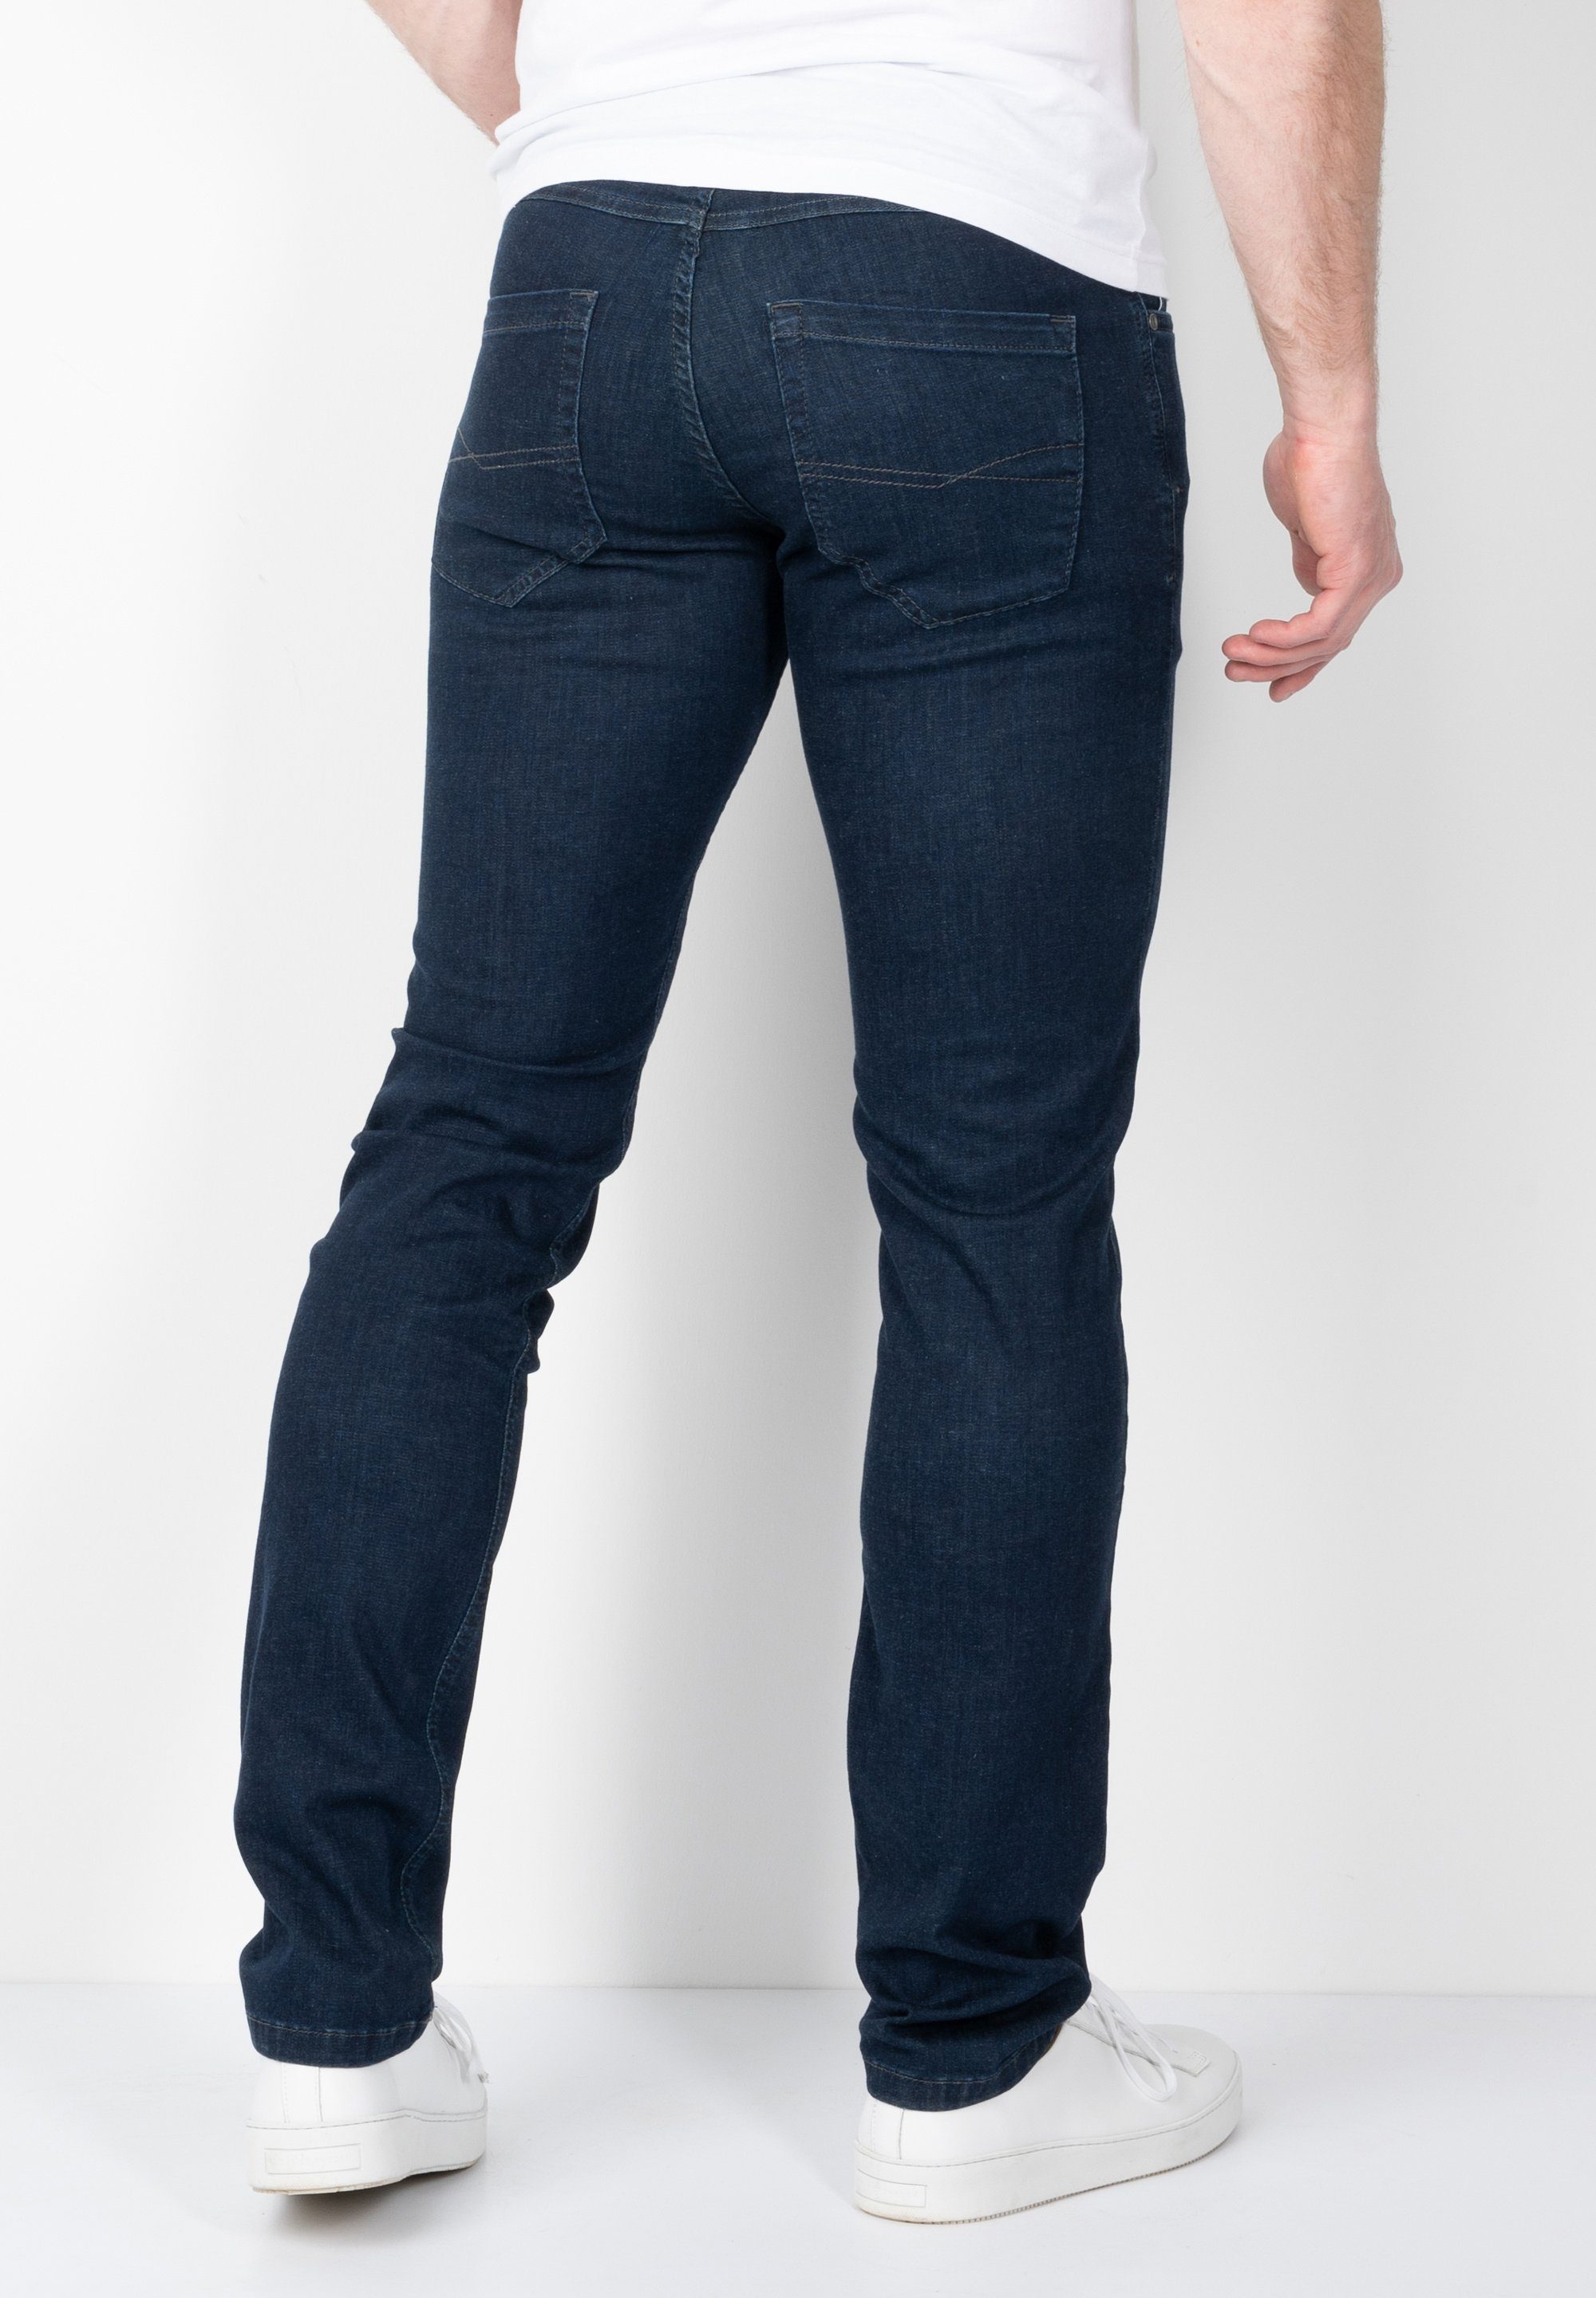 SUNWILL Straight-Jeans Super Stretch navy dark Fit in Fitted